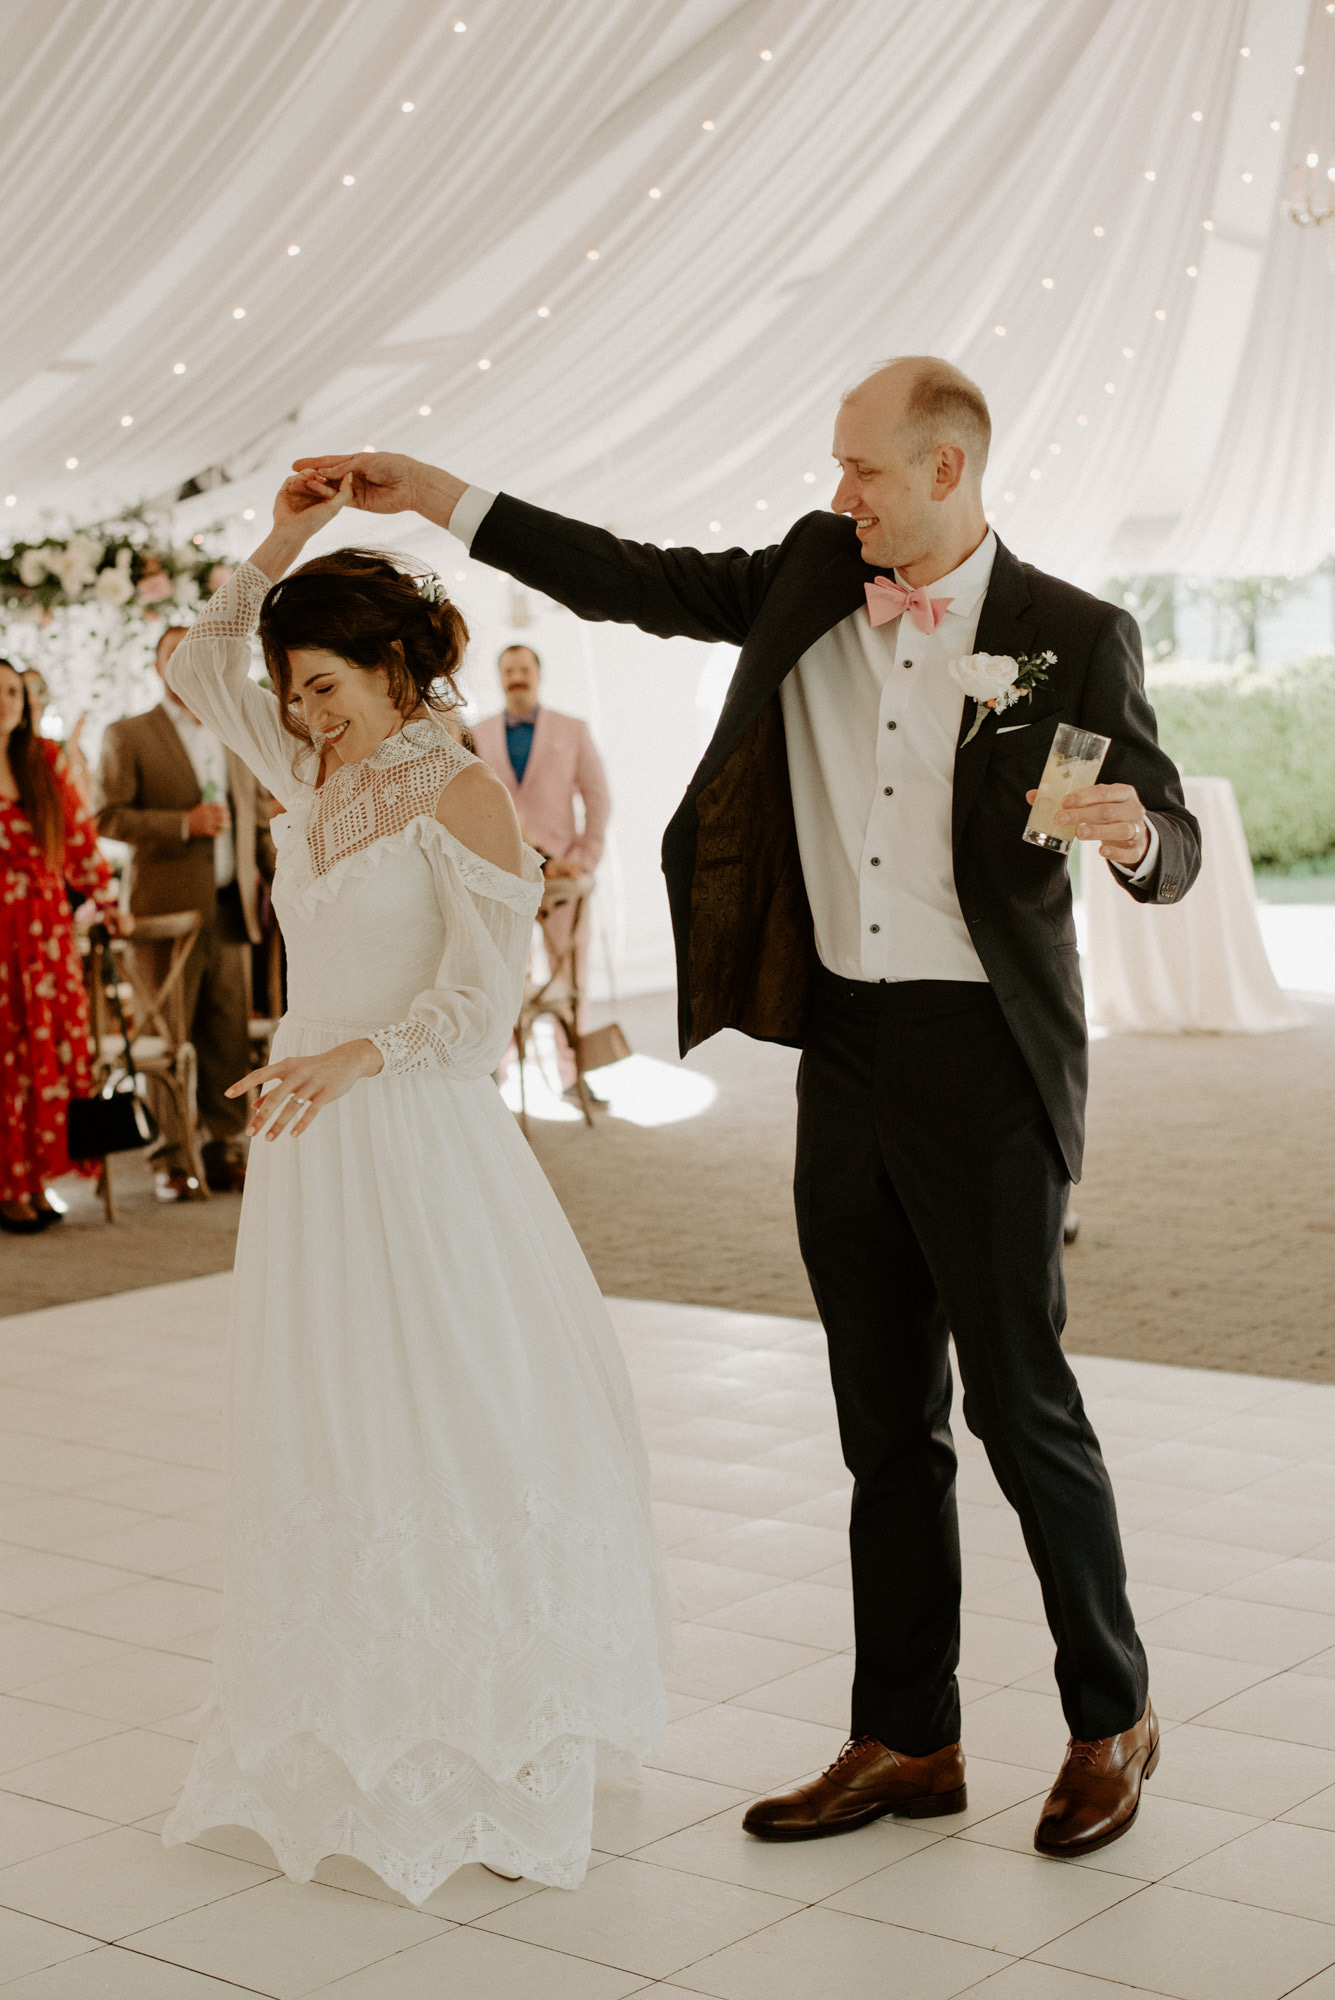 A bride and groom share their first dance under a white canopy at their wedding, with the groom twirling the bride while holding a drink, creating a joyful and elegant atmosphere with guests in the background.